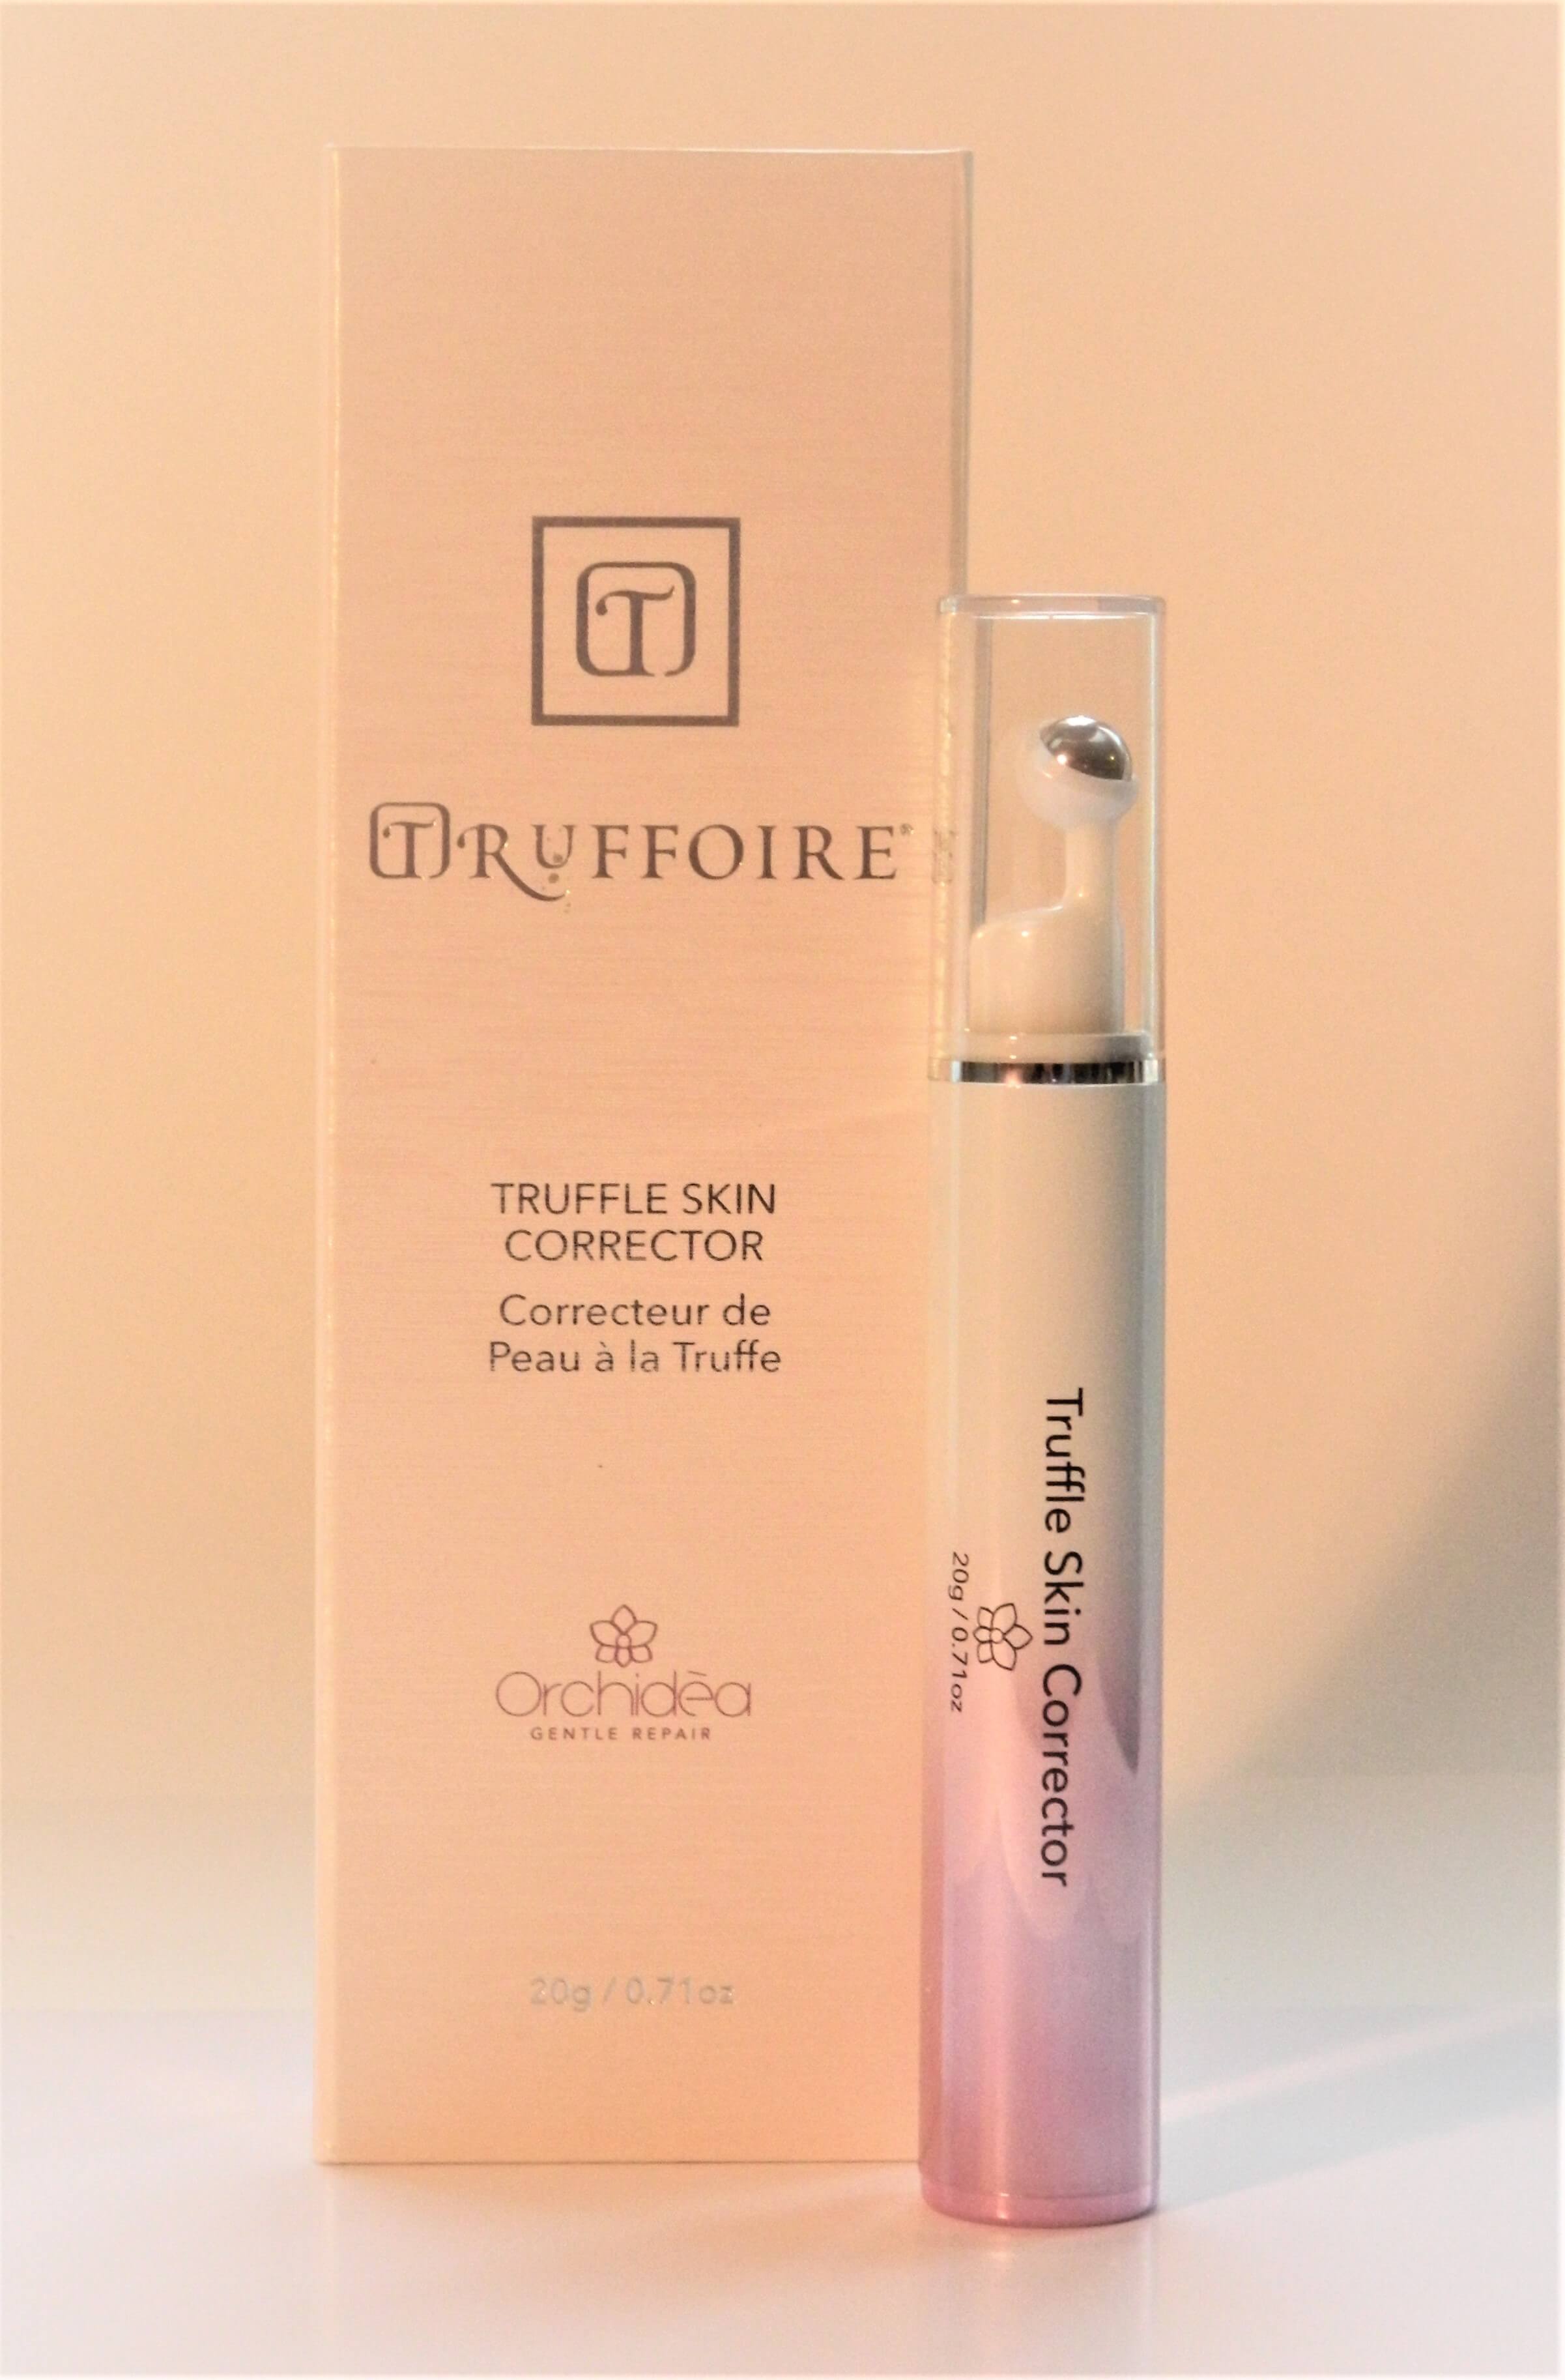 Truffoire Skin Corrector in front of box